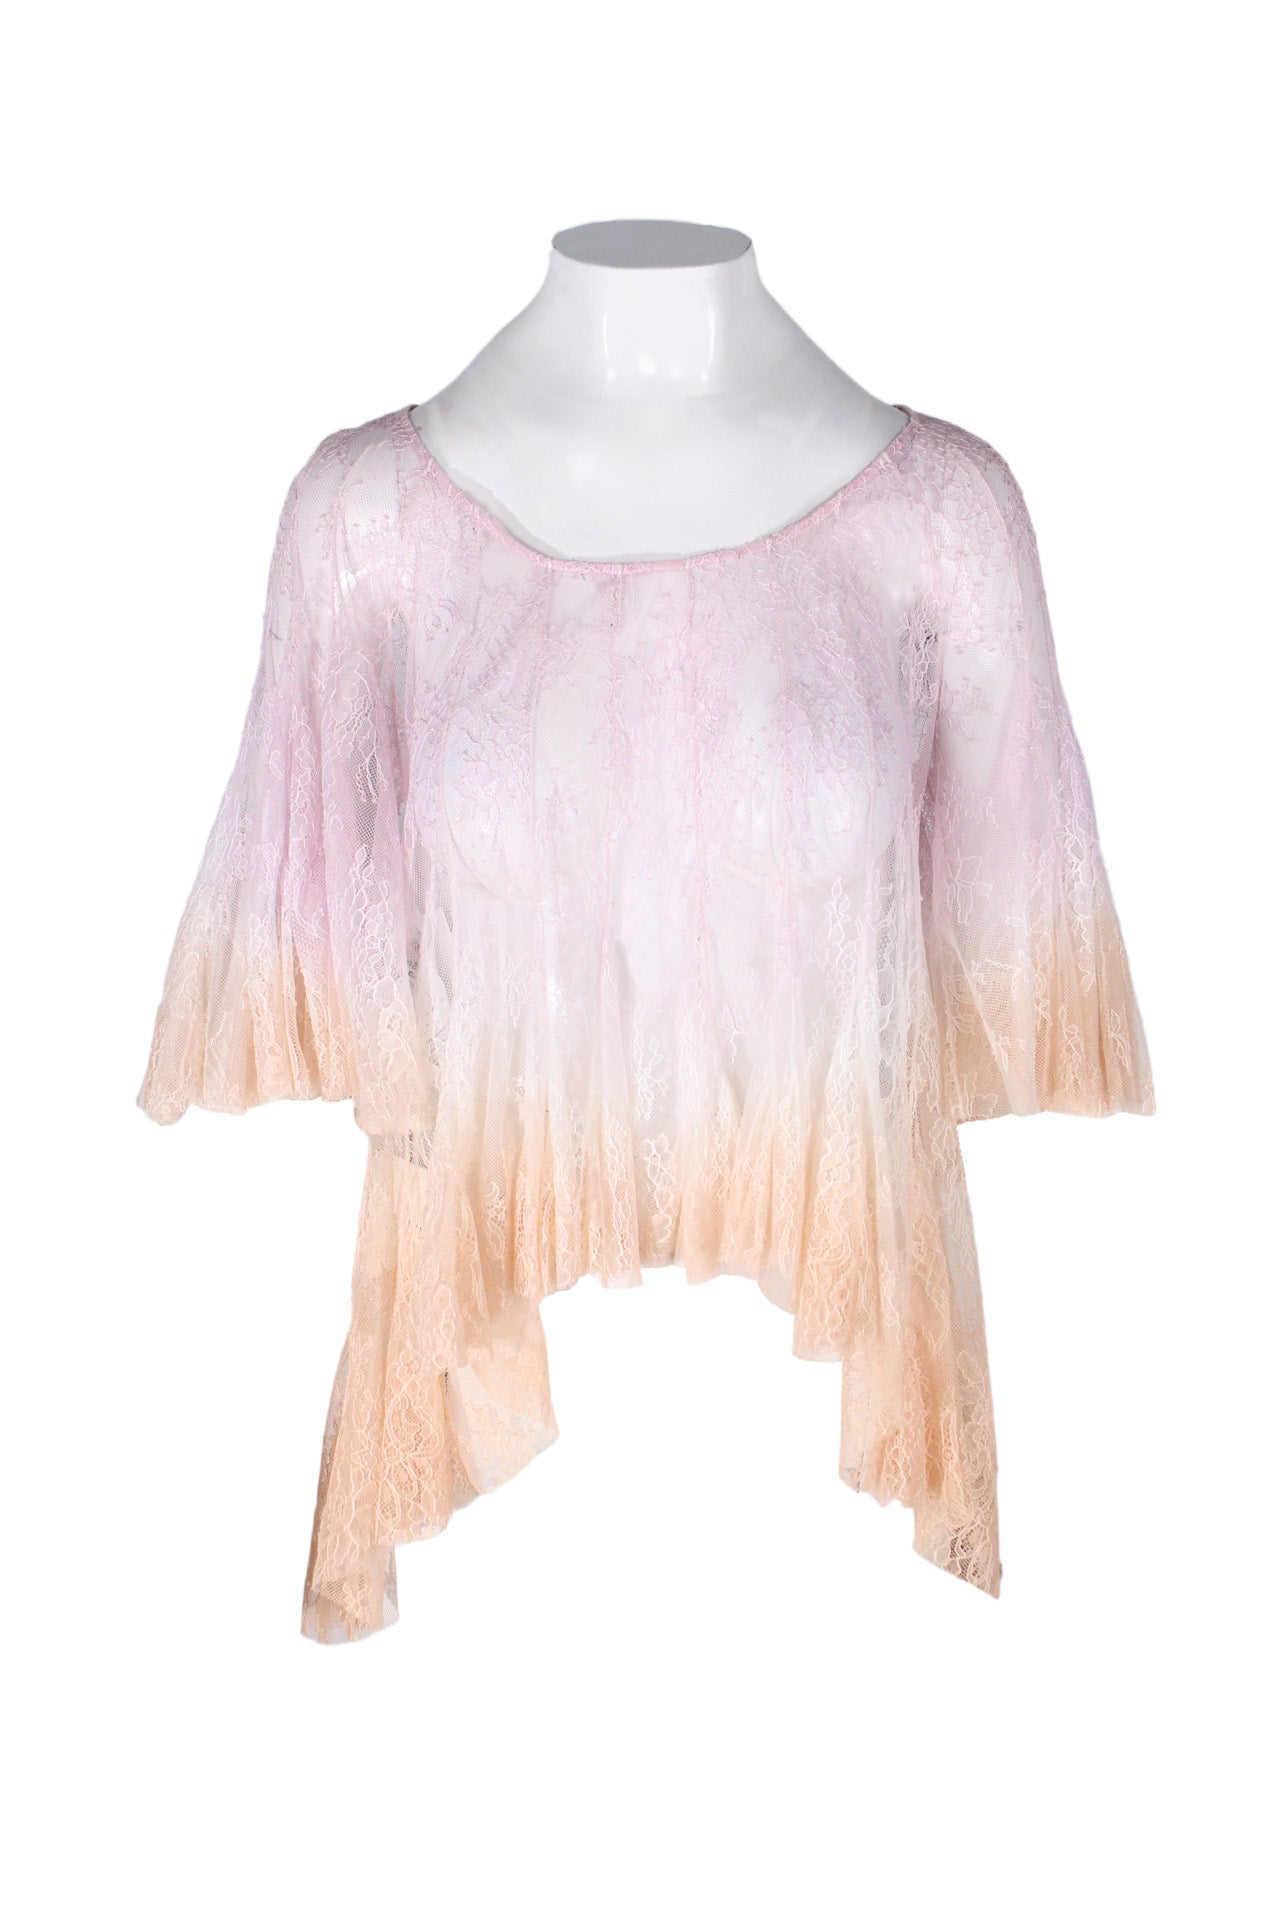 philosophy pink and orange ombre lace blouse. features high low hem, gradient colorway, wide rounded neckline, short belled sleeves/hem, and sheer floral lace body. 